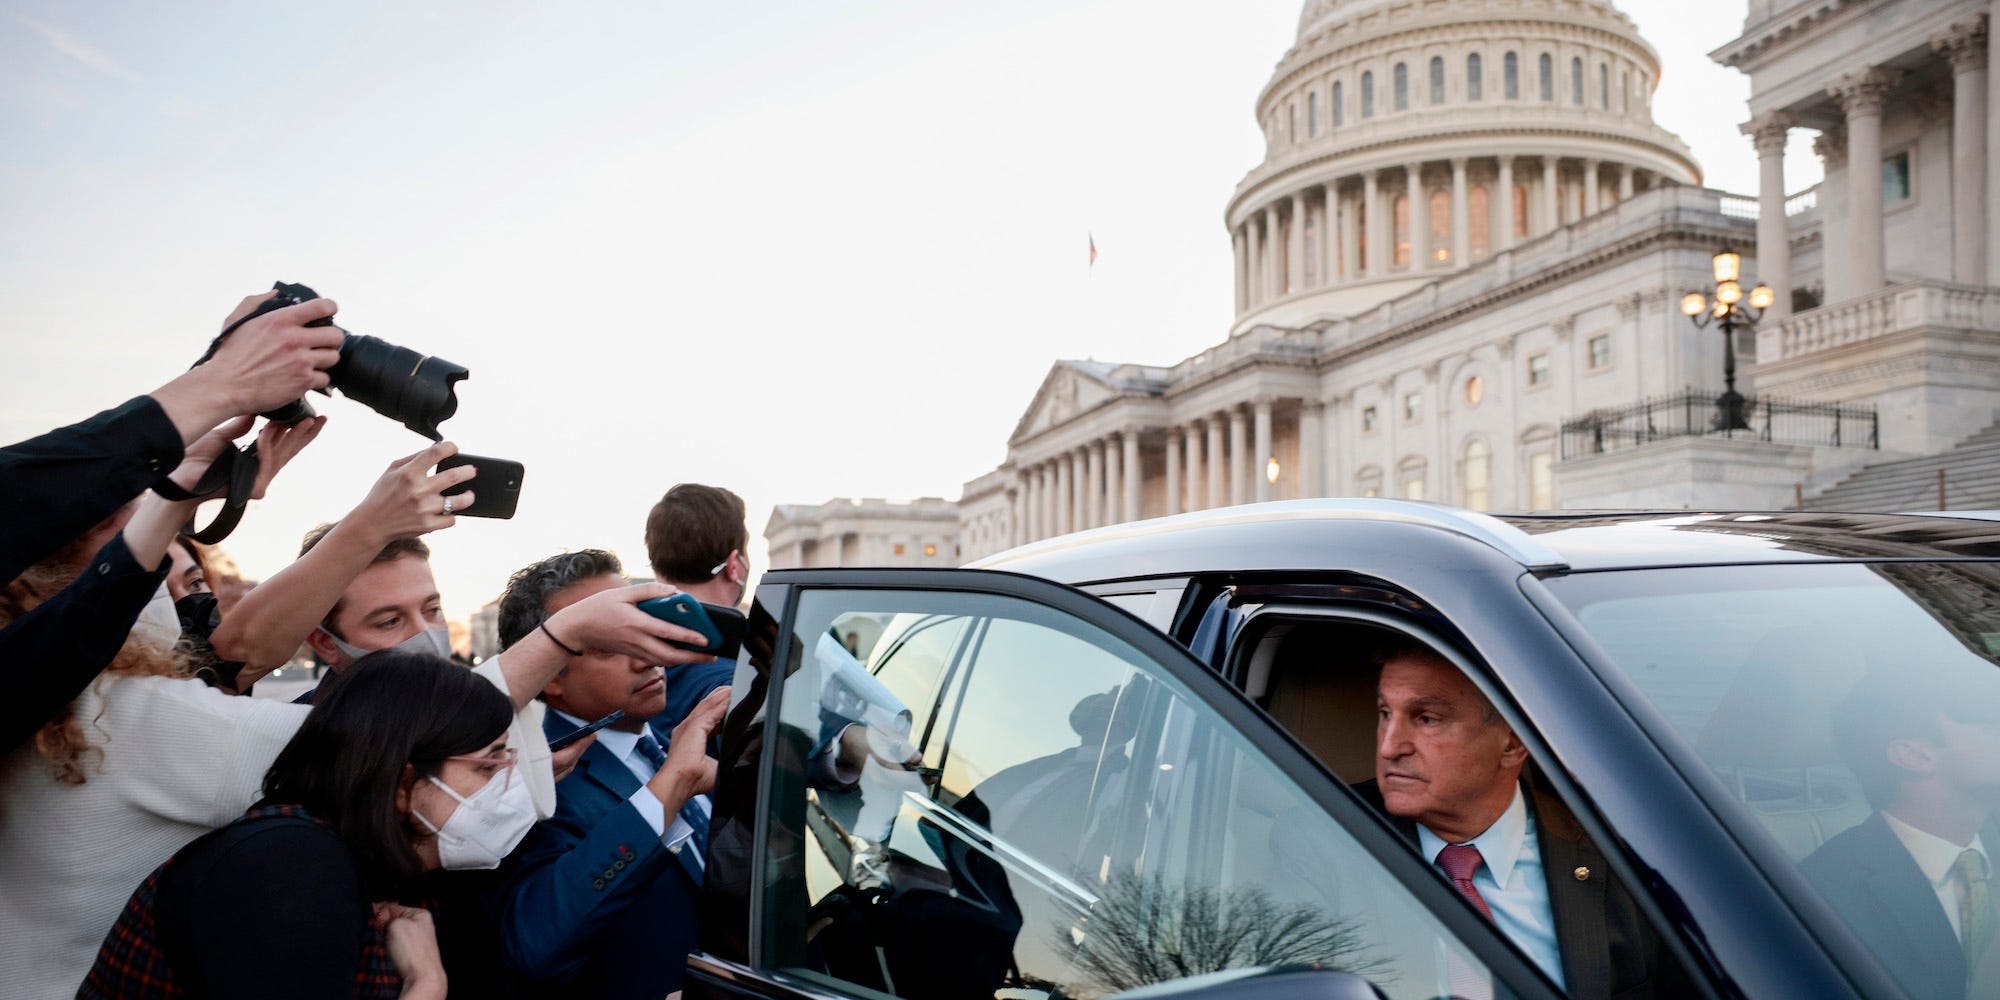 Democratic Sen. Joe Manchin of West Virginia is followed to his car by reporters after a vote at the US Capitol on December 14, 2021.